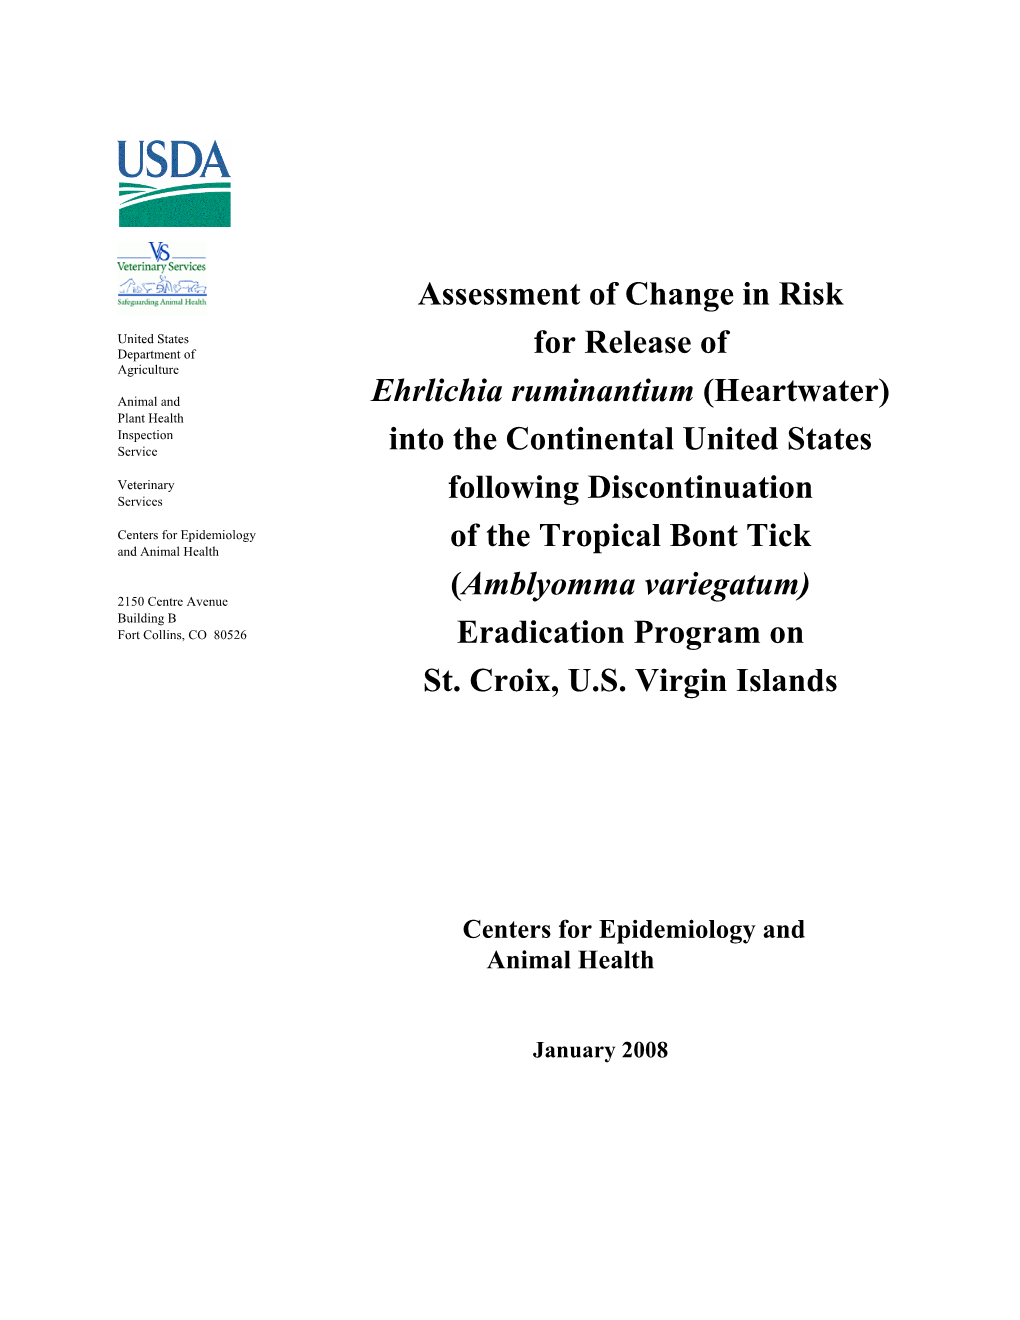 Assessment of Change in Risk for Release of Ehrlichia Ruminantium (Heartwater) Into the Continental United States Following Disc